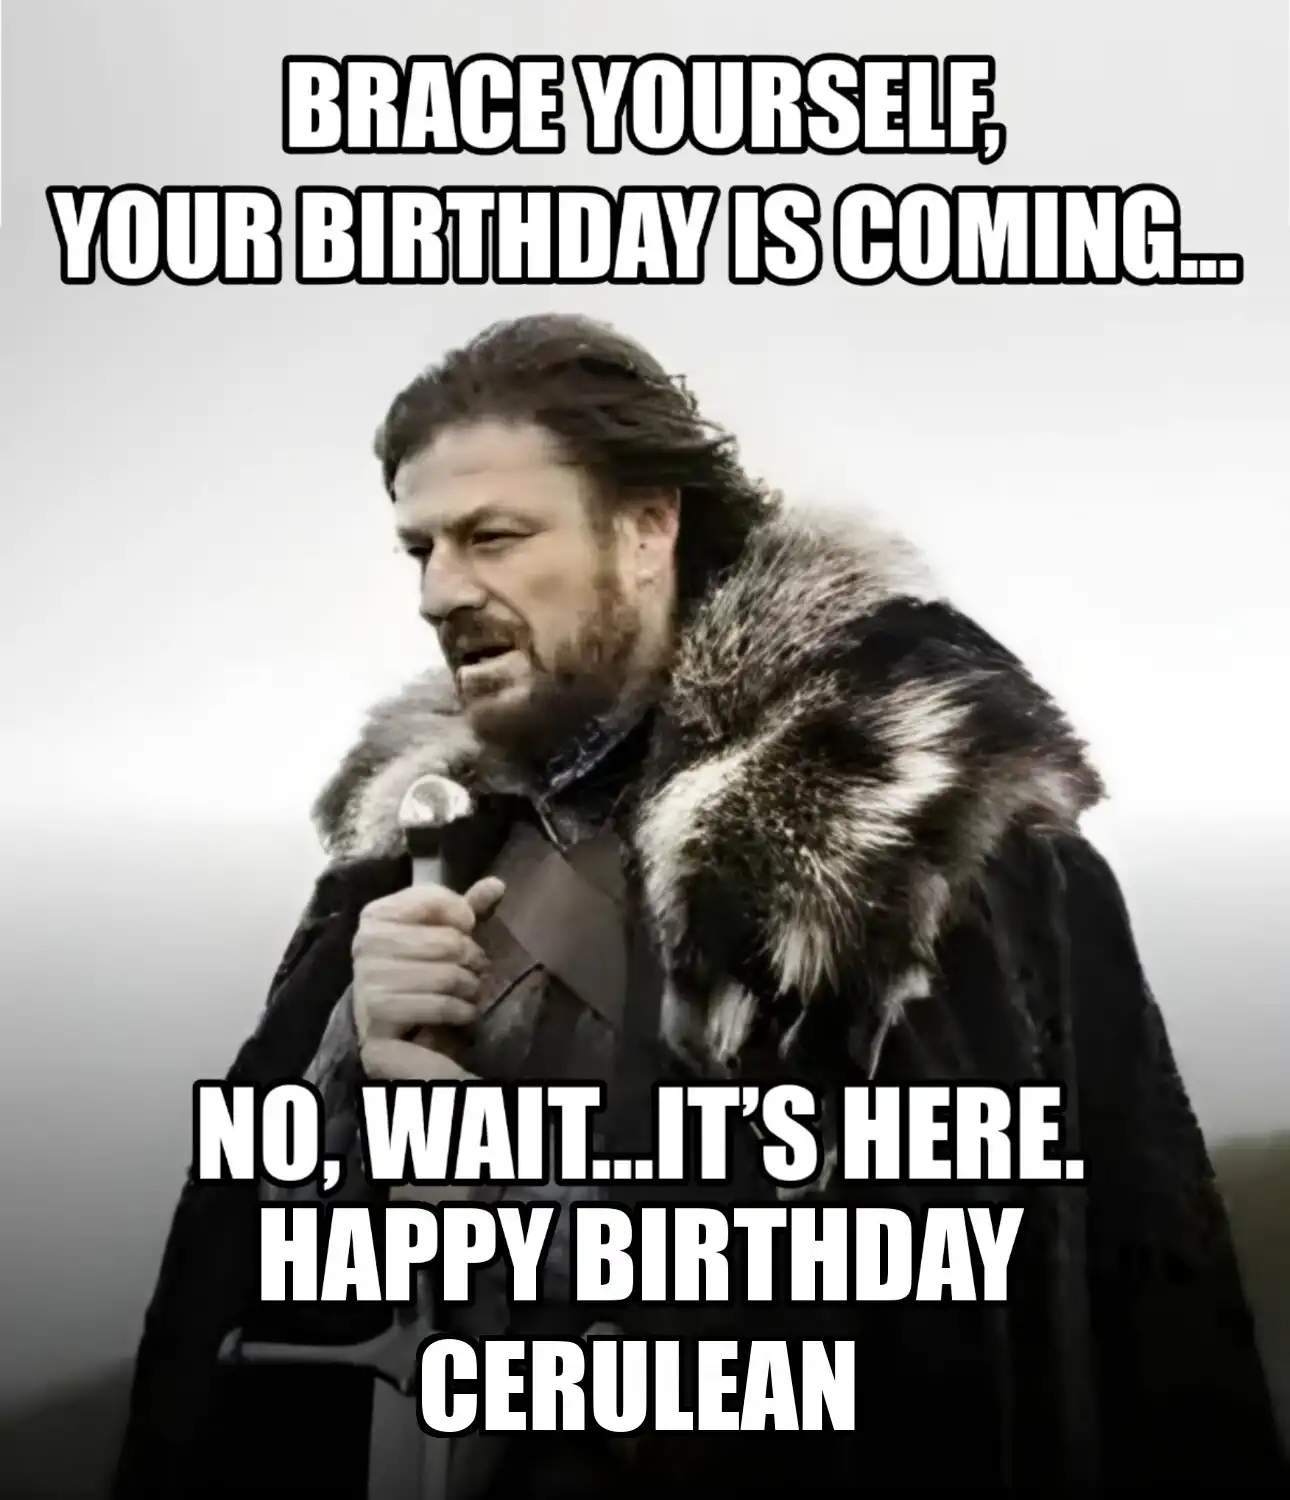 Happy Birthday Cerulean Brace Yourself Your Birthday Is Coming Meme